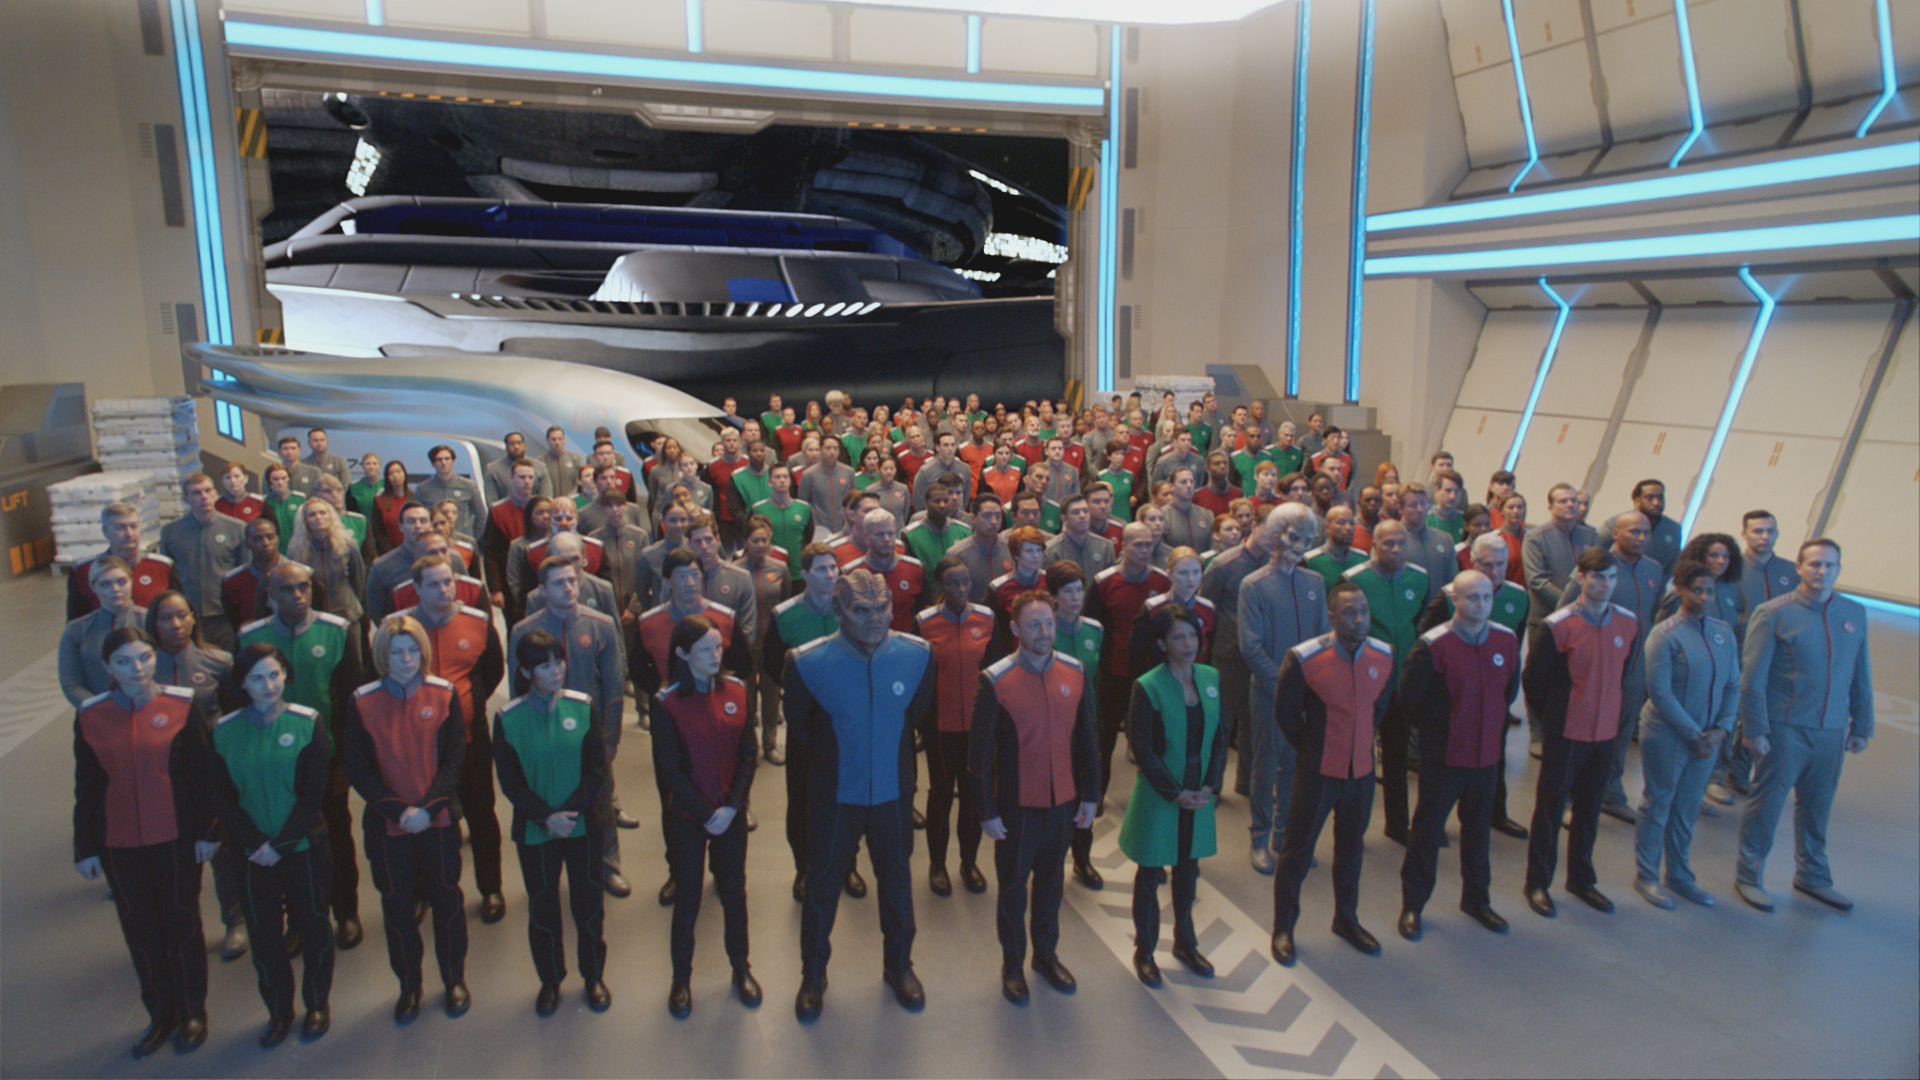 4 Reasons to Be Excited About Seth MacFarlane’s The Orville